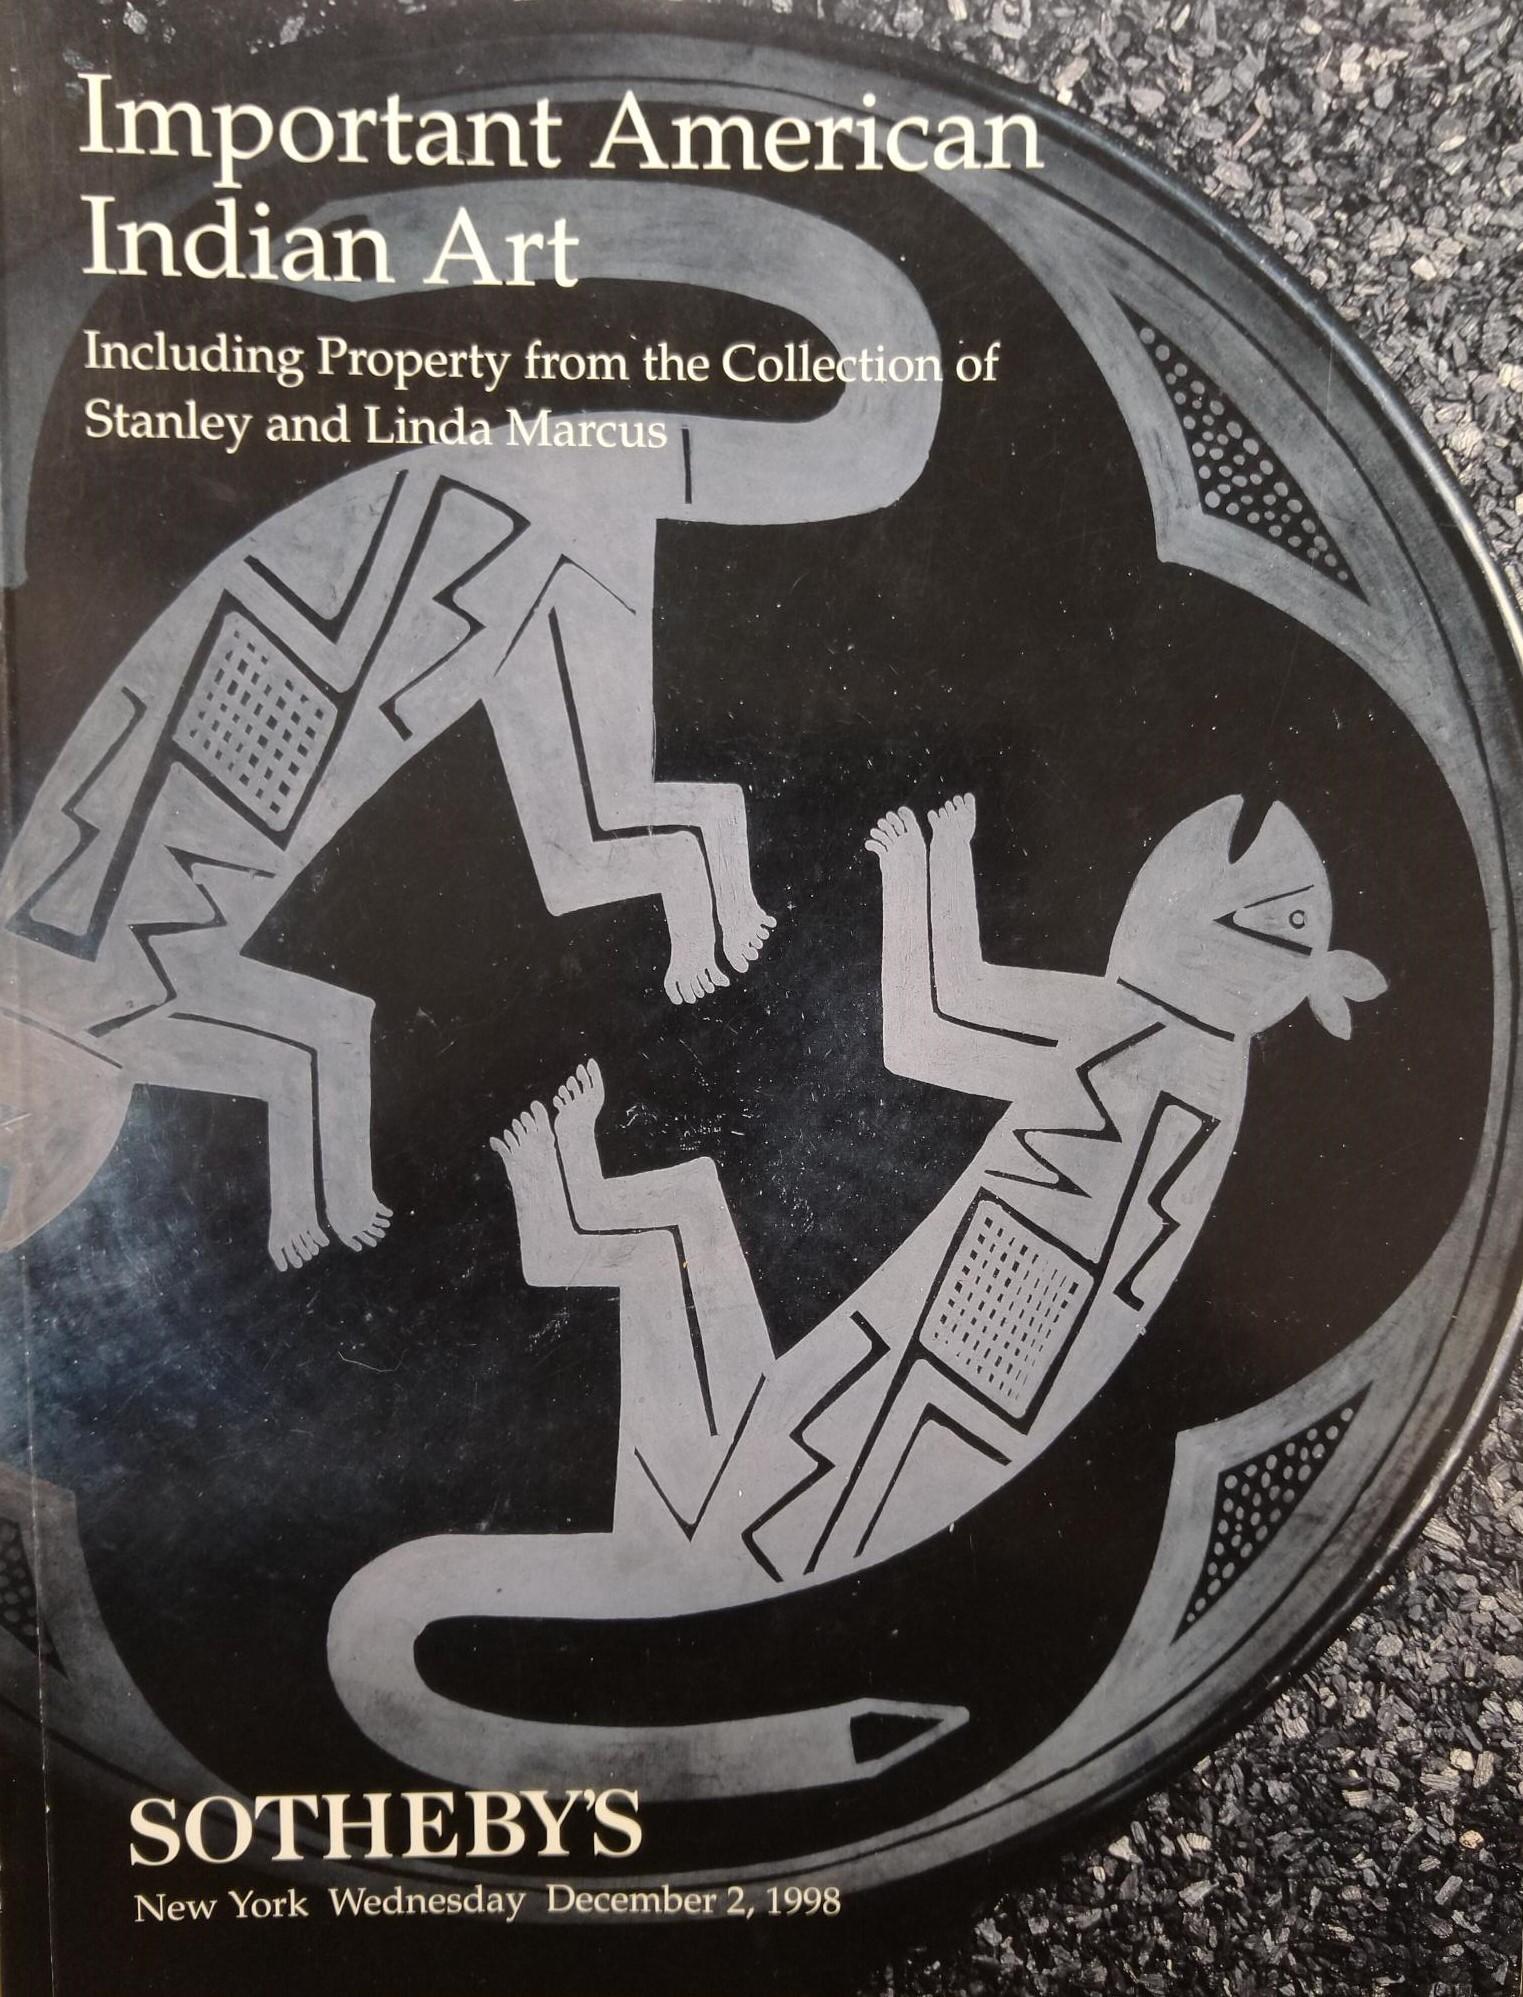 Various auction and museum catalogues concerning tribal art